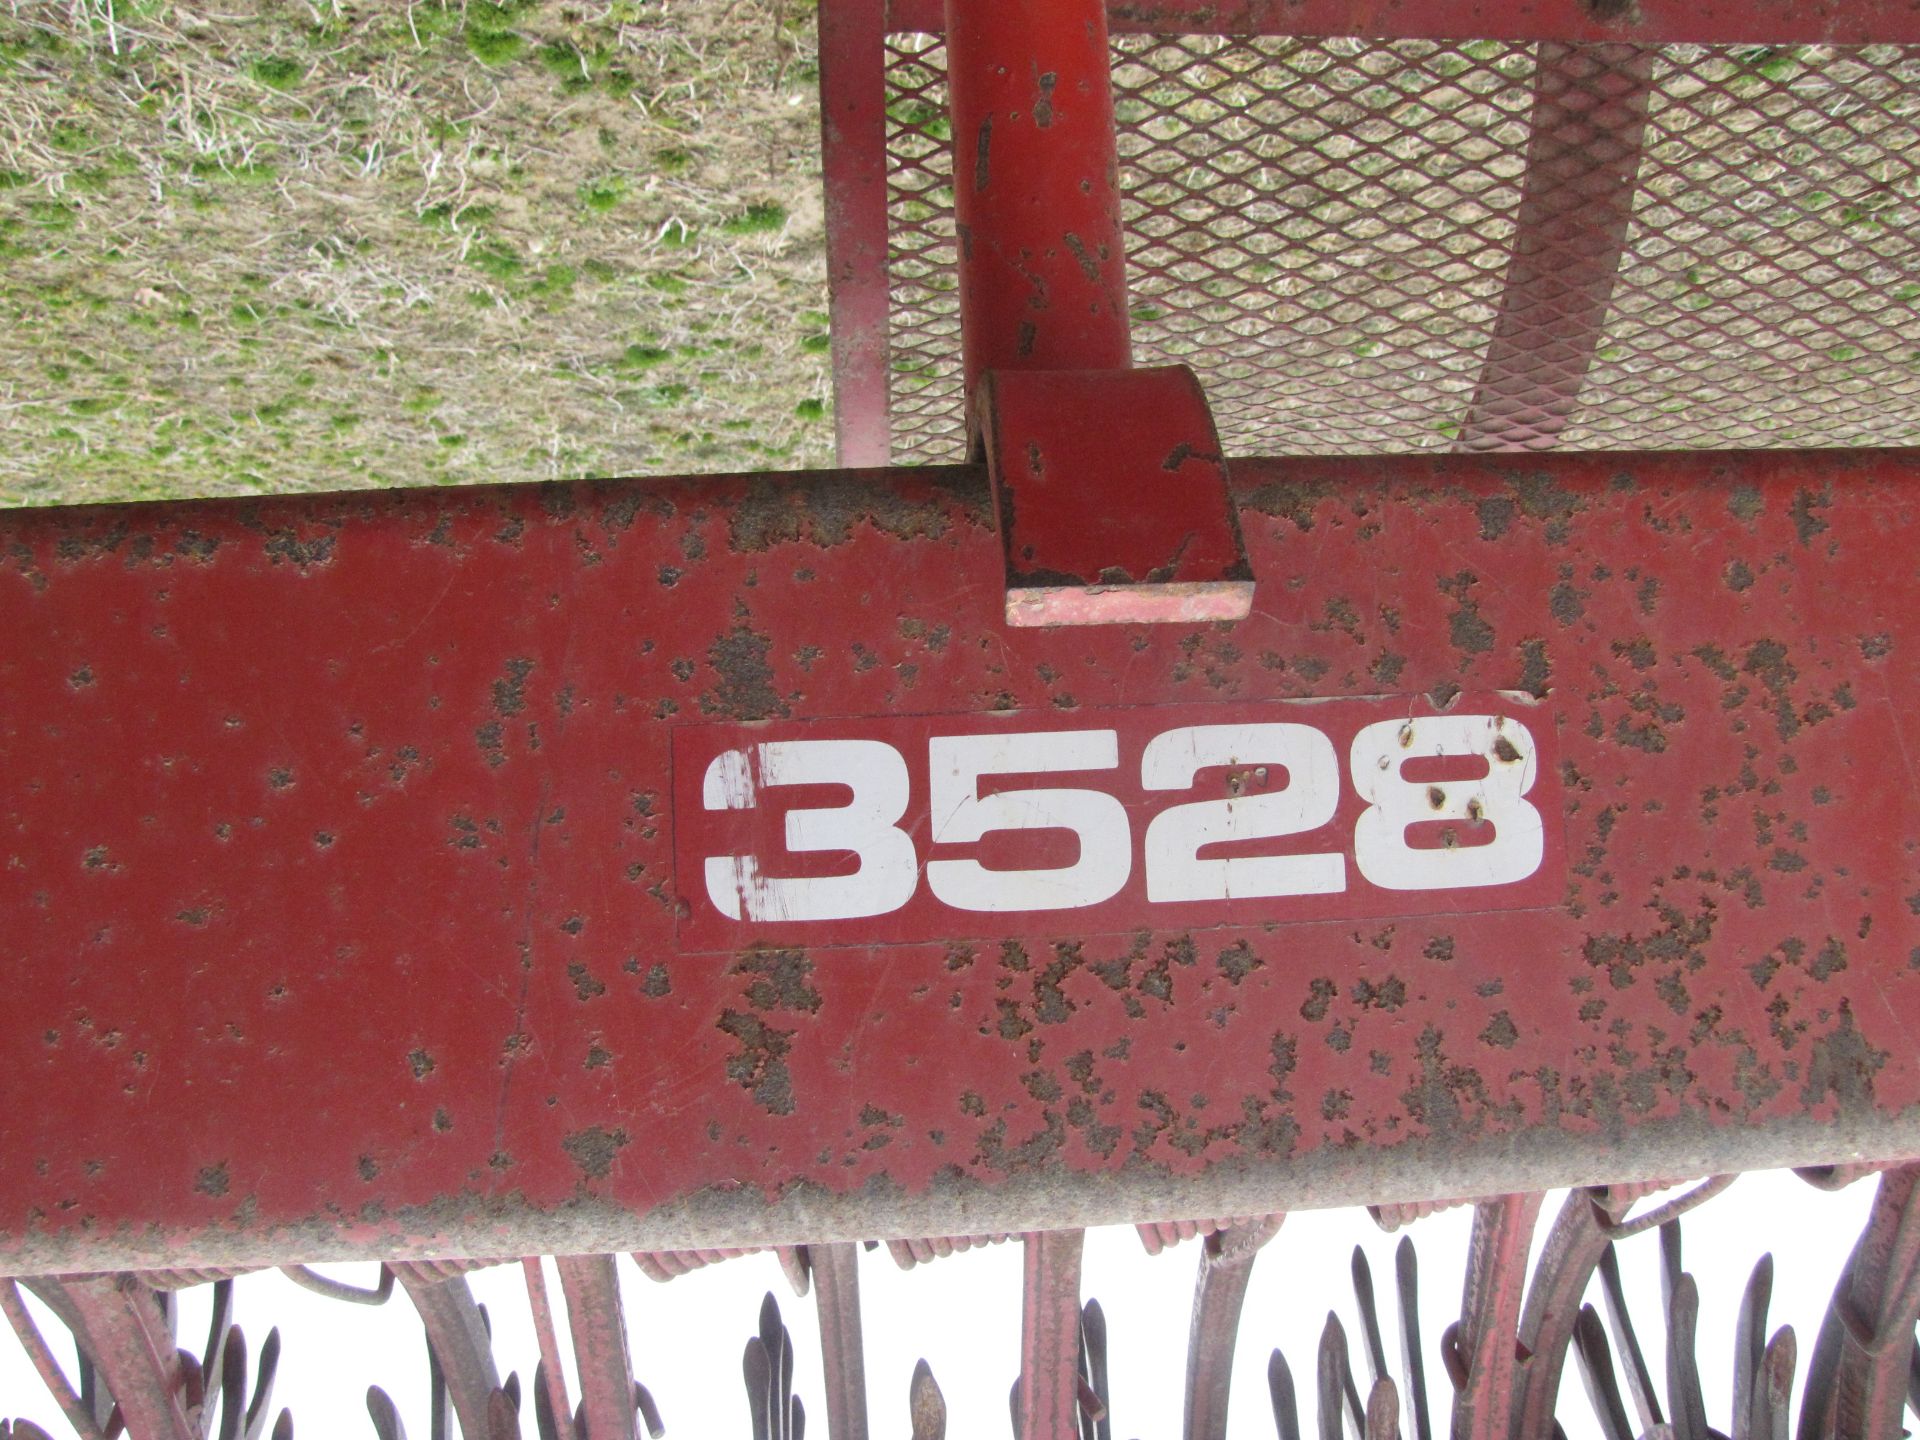 28' Yetter 3528 Rotary Hoe - Image 17 of 19